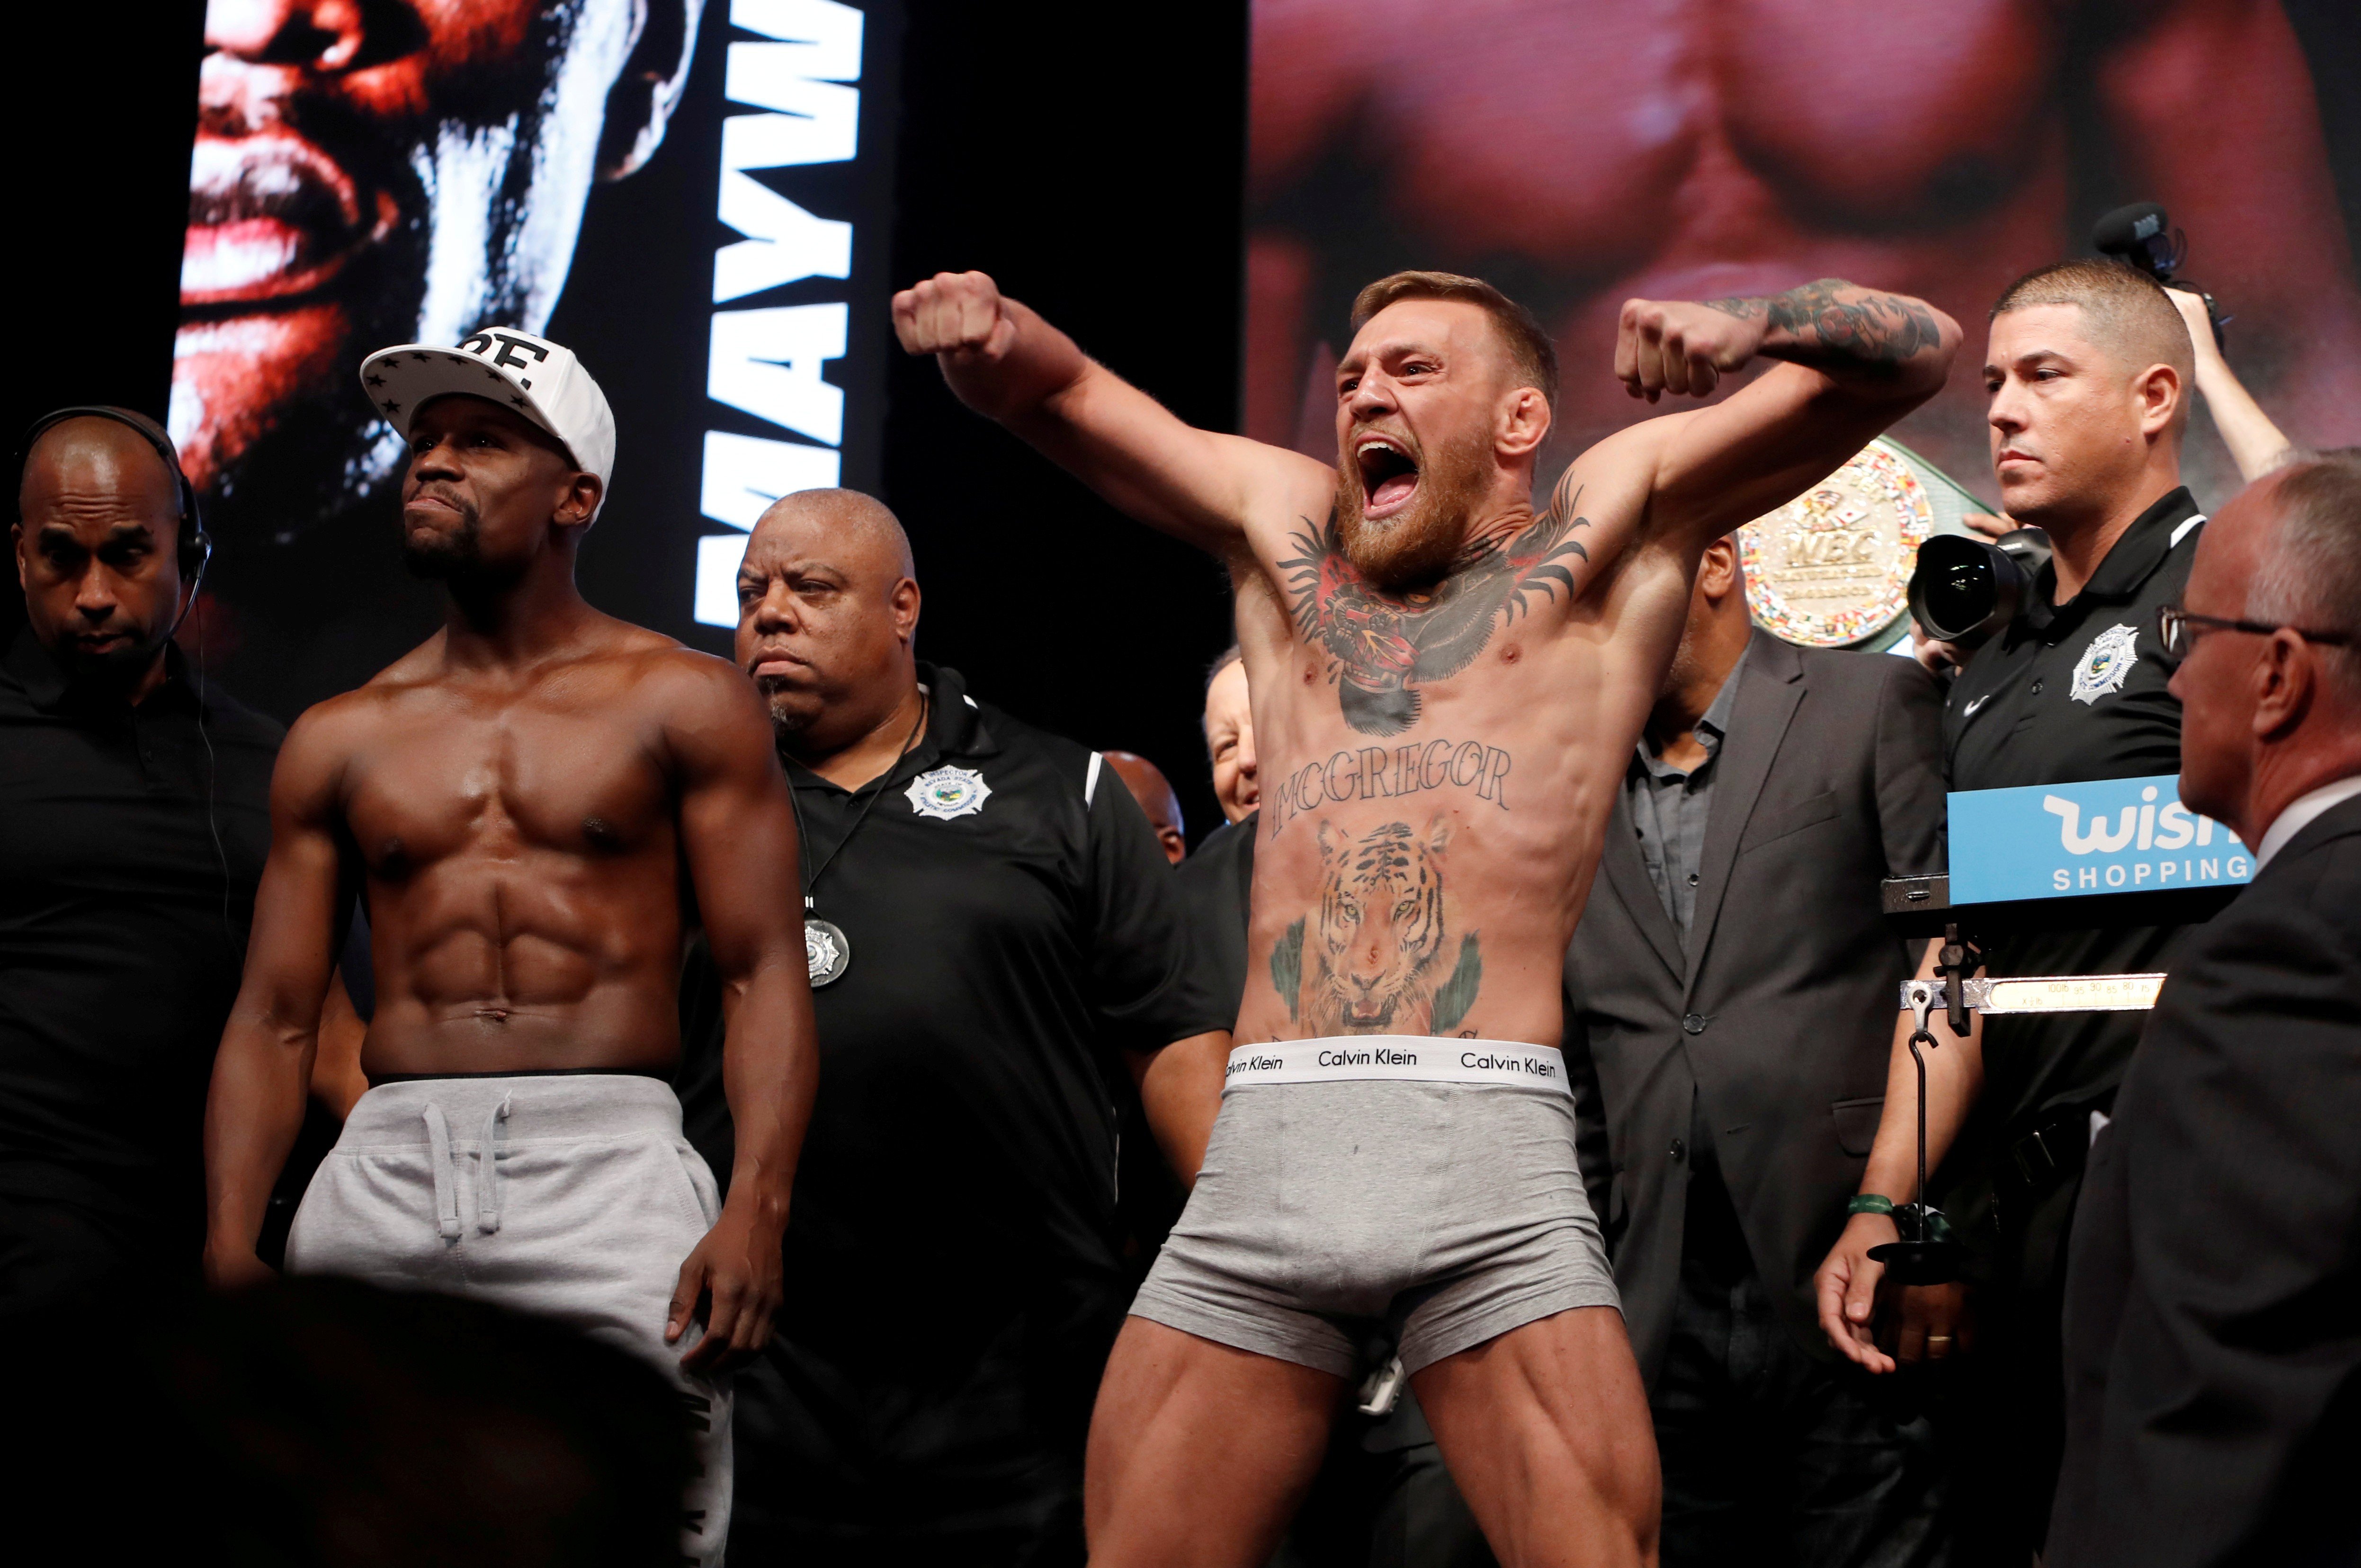 Retired undefeated boxer Floyd Mayweather with former UFC lightweight champion Conor McGregor ahead of their superfight in 2017. Photo: Reuters